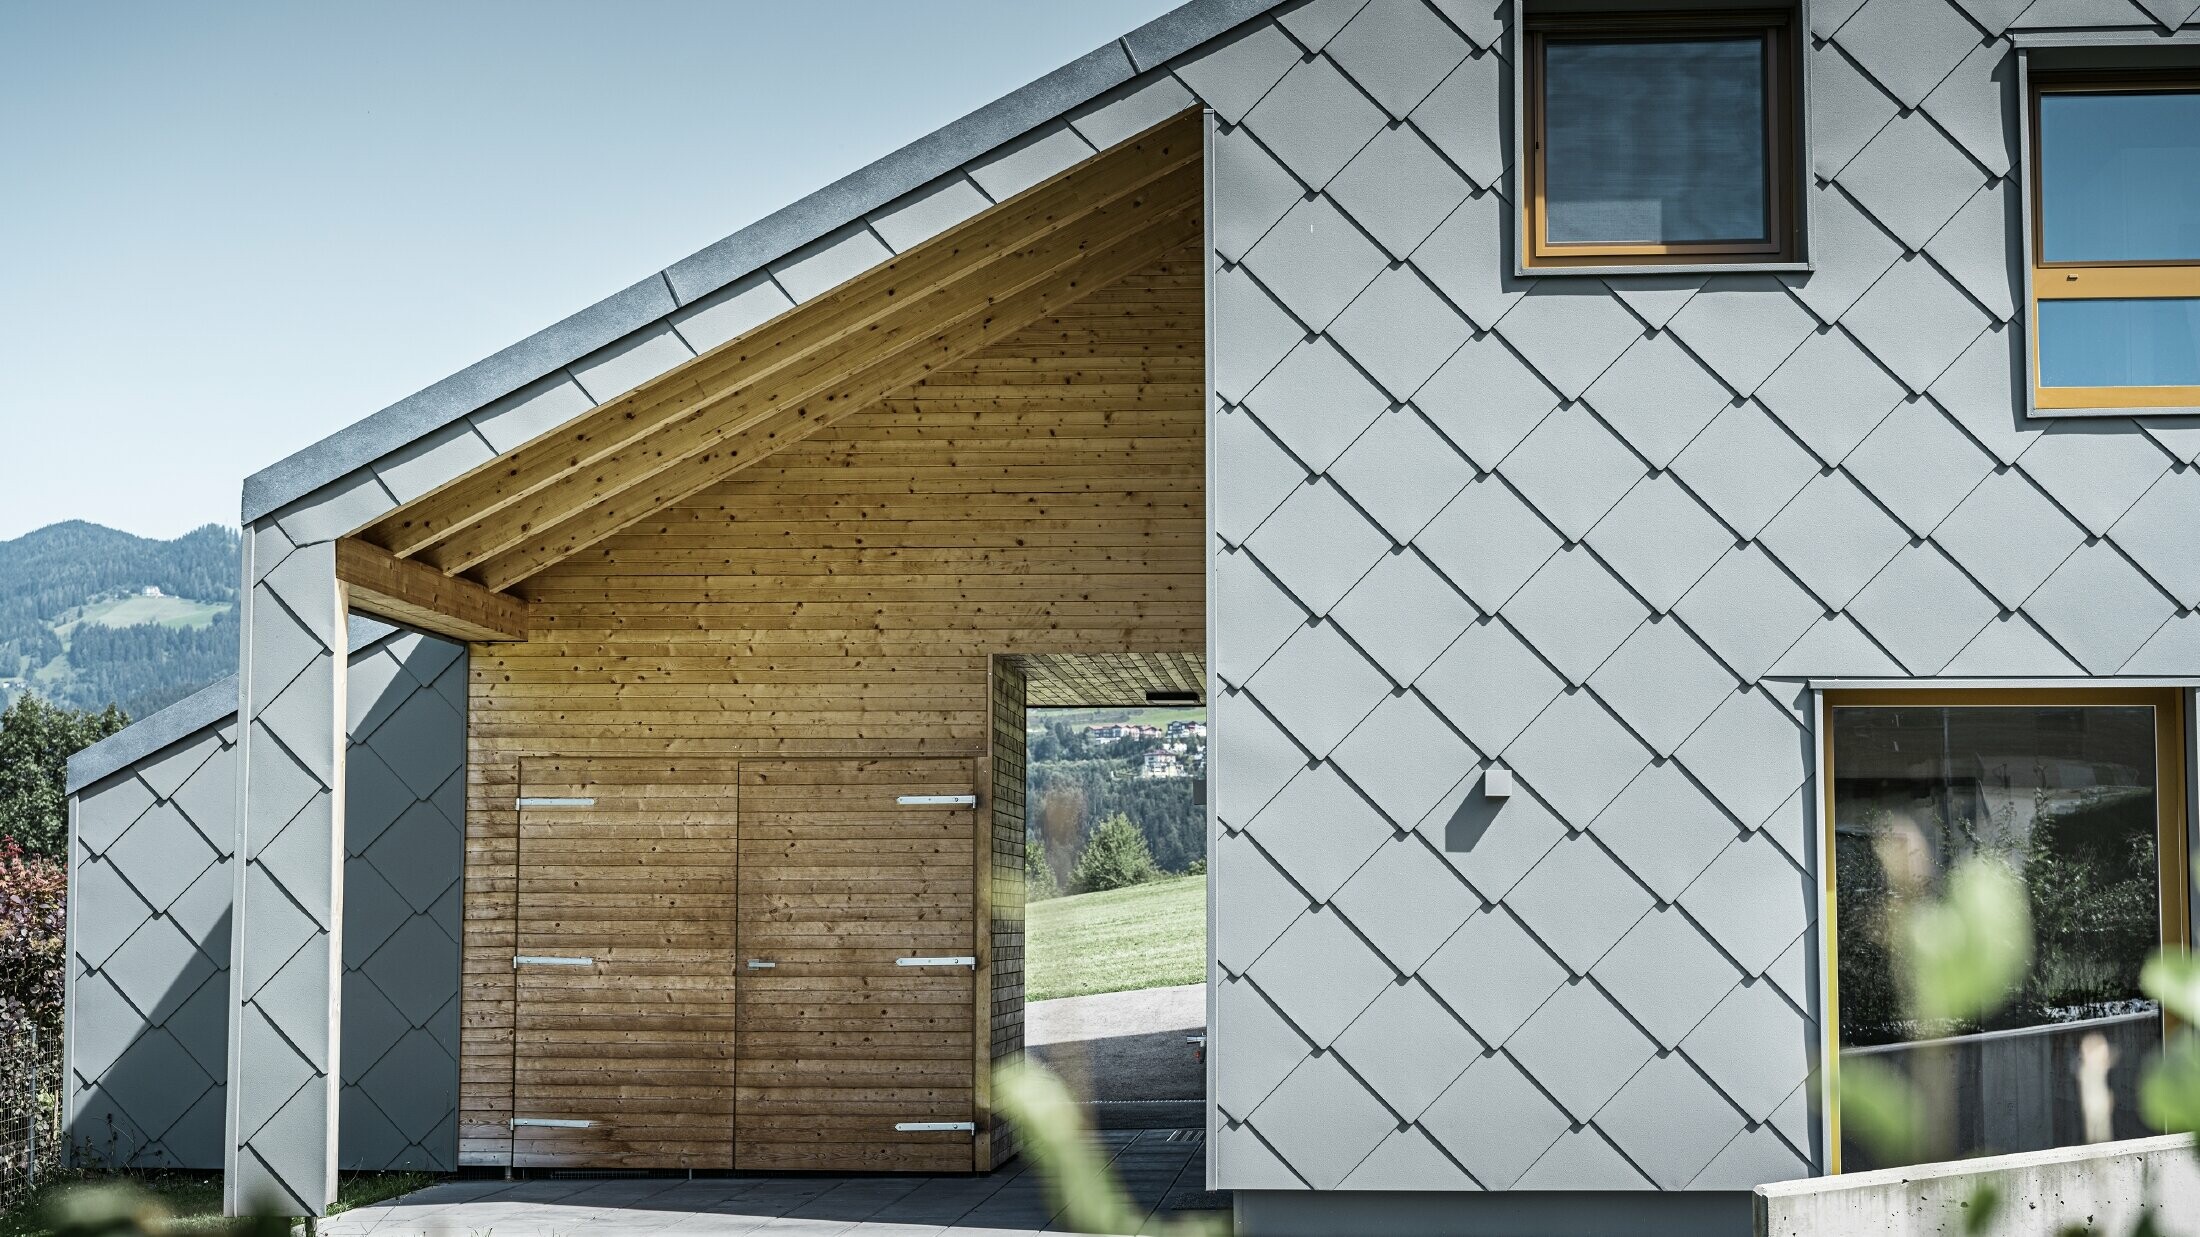 The covered entrance area is made with horizontal wood panelling, the rest of the façade is clad with the large PREFA aluminium rhomboid façade tiles in light grey